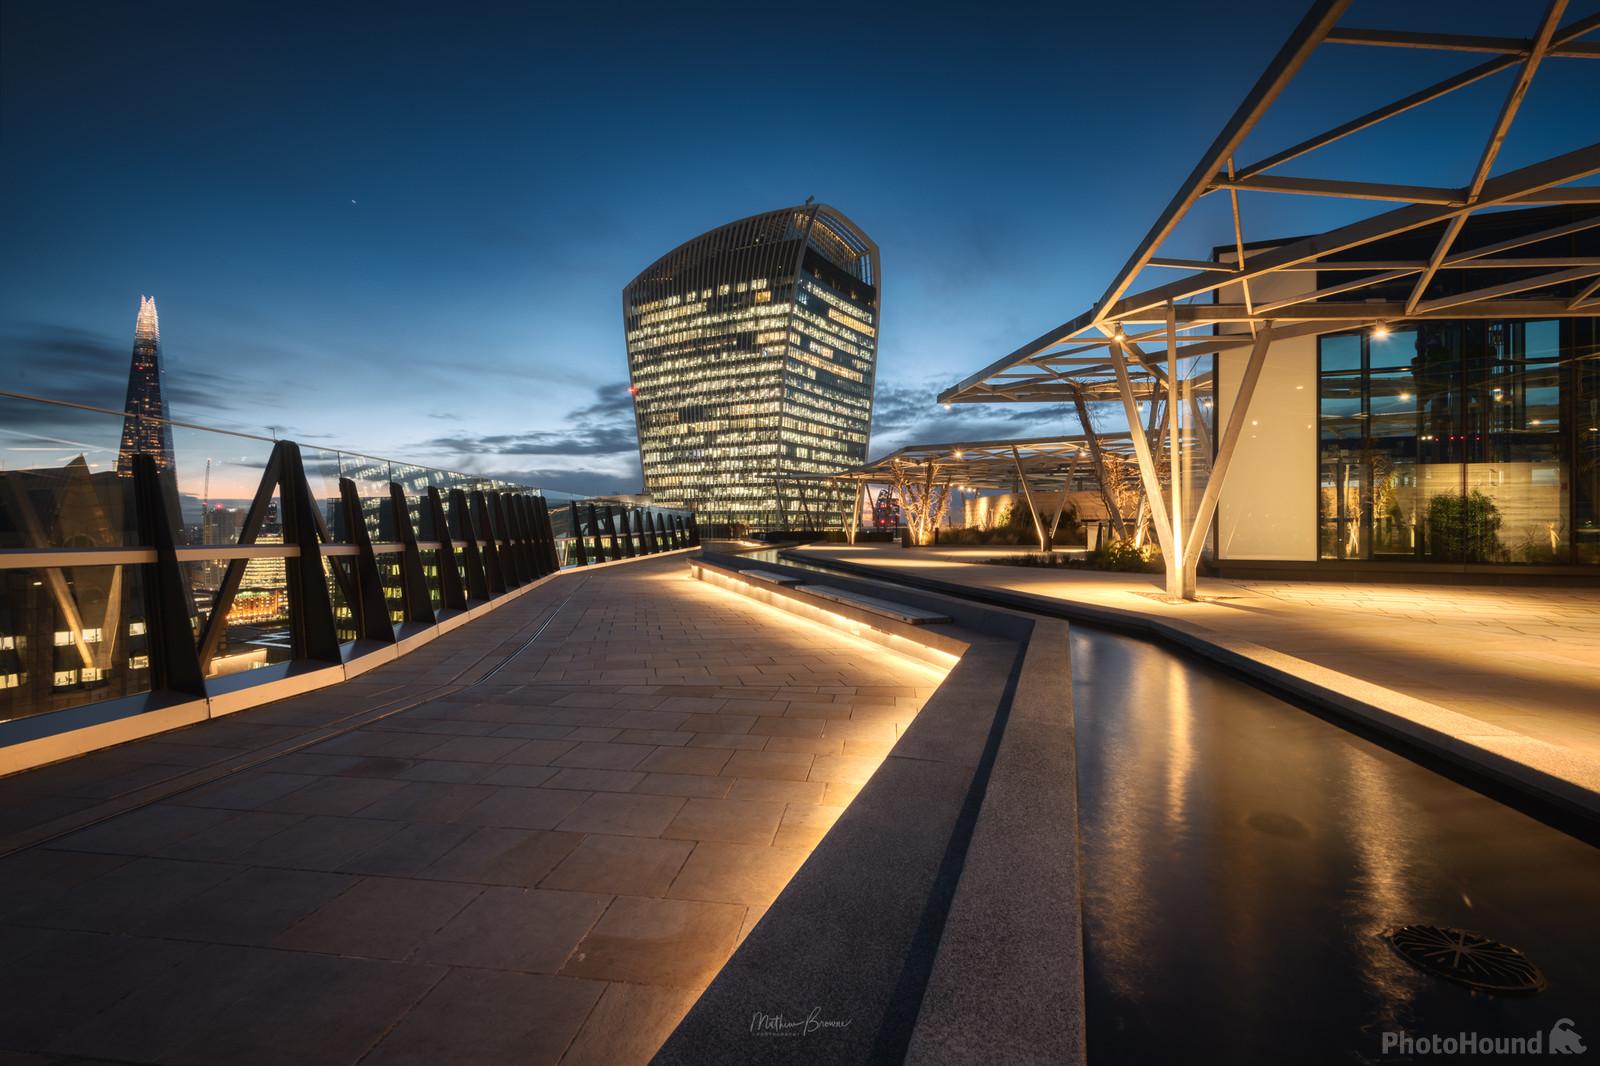 Image of 120 Fenchurch Street Roof Garden by Mathew Browne